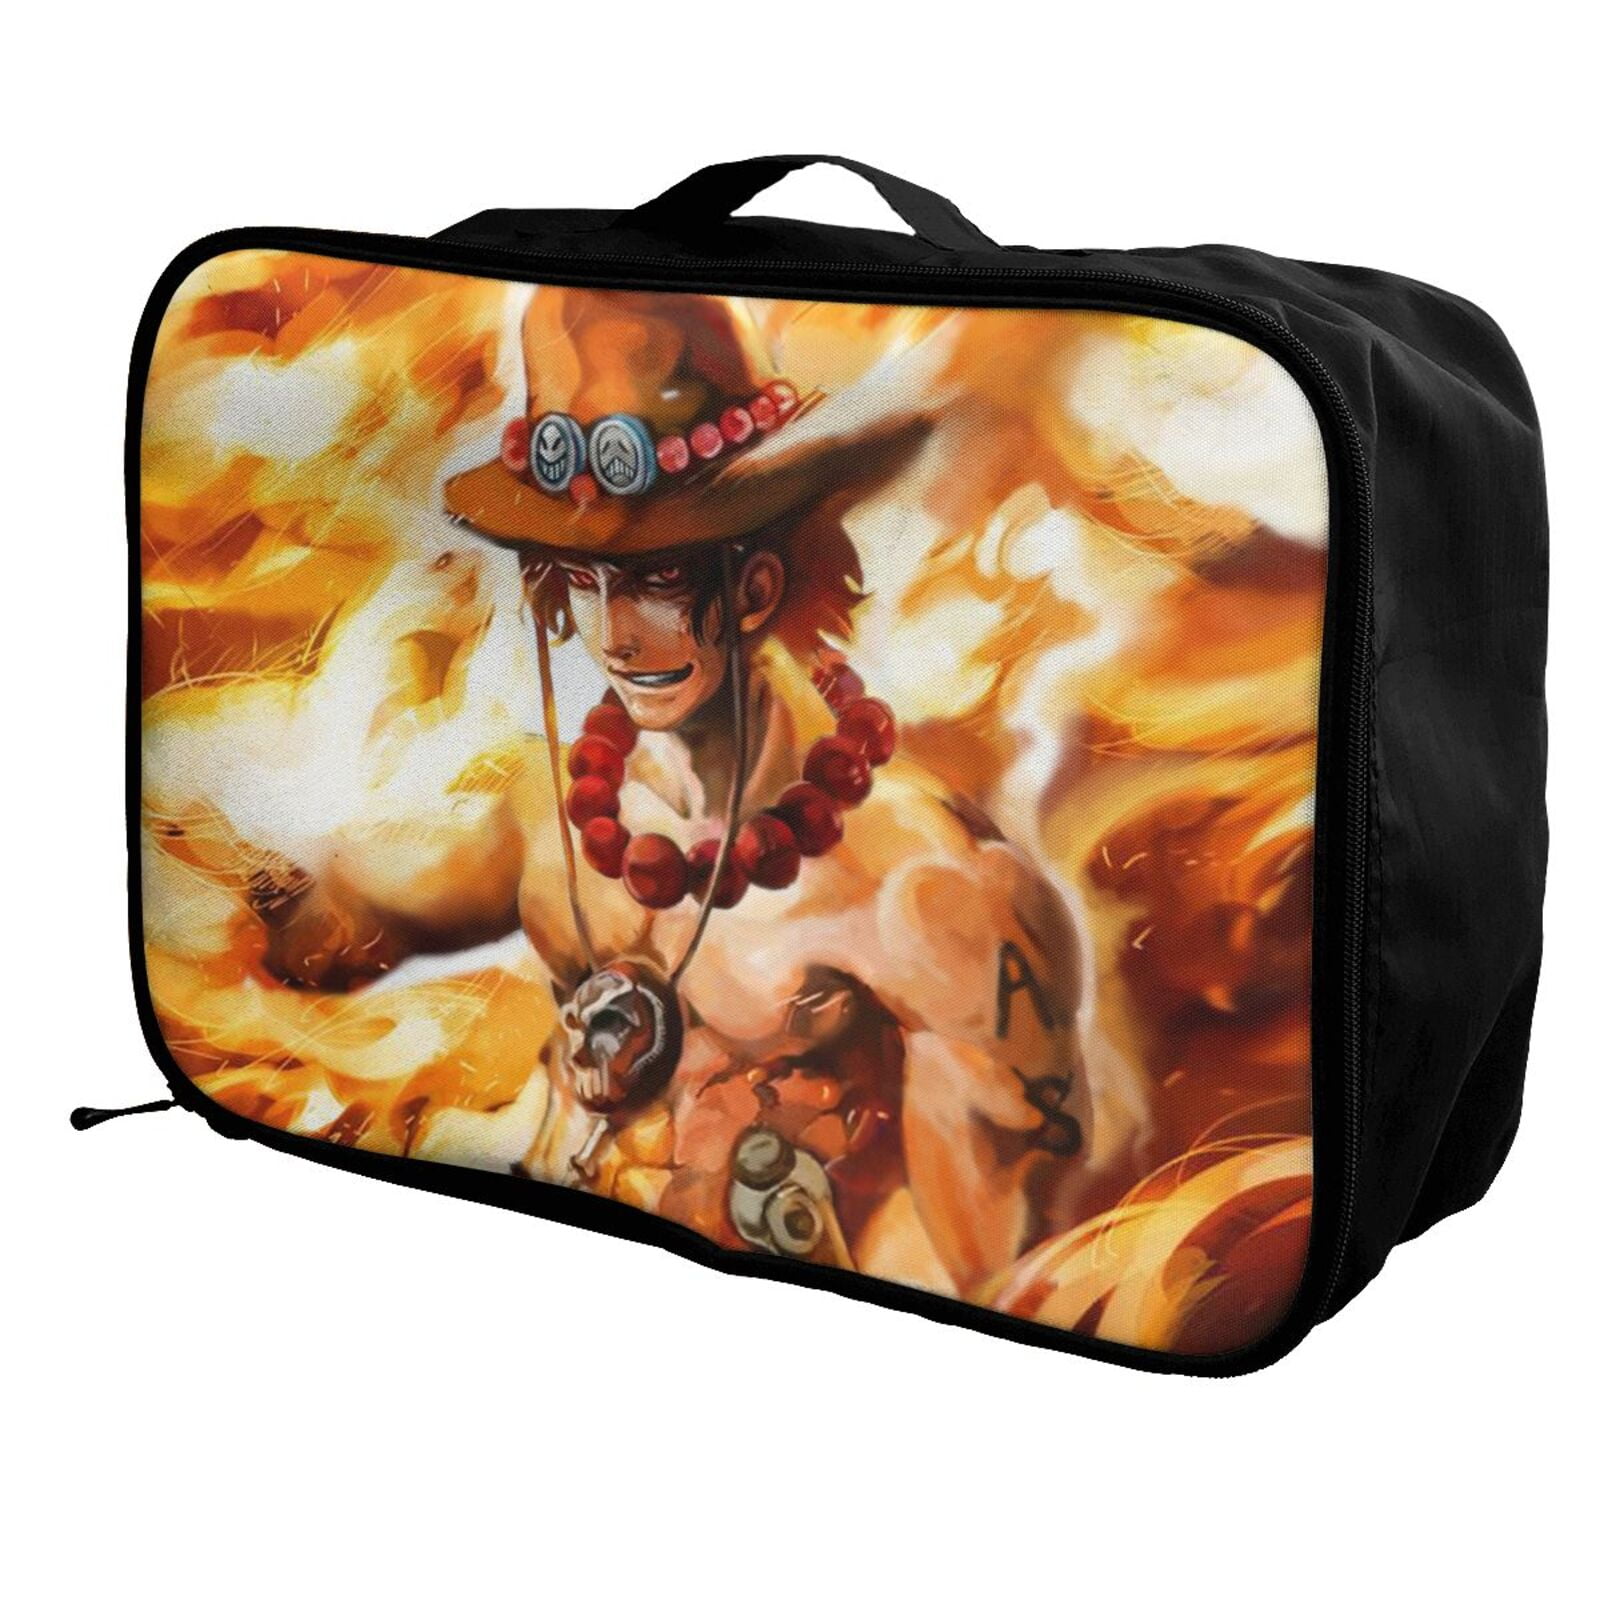 Anime One Piece Customize Casual Portable Travel Bag Suitcase Storage Bag Luggage Packing Tote Bag Trolley Bag